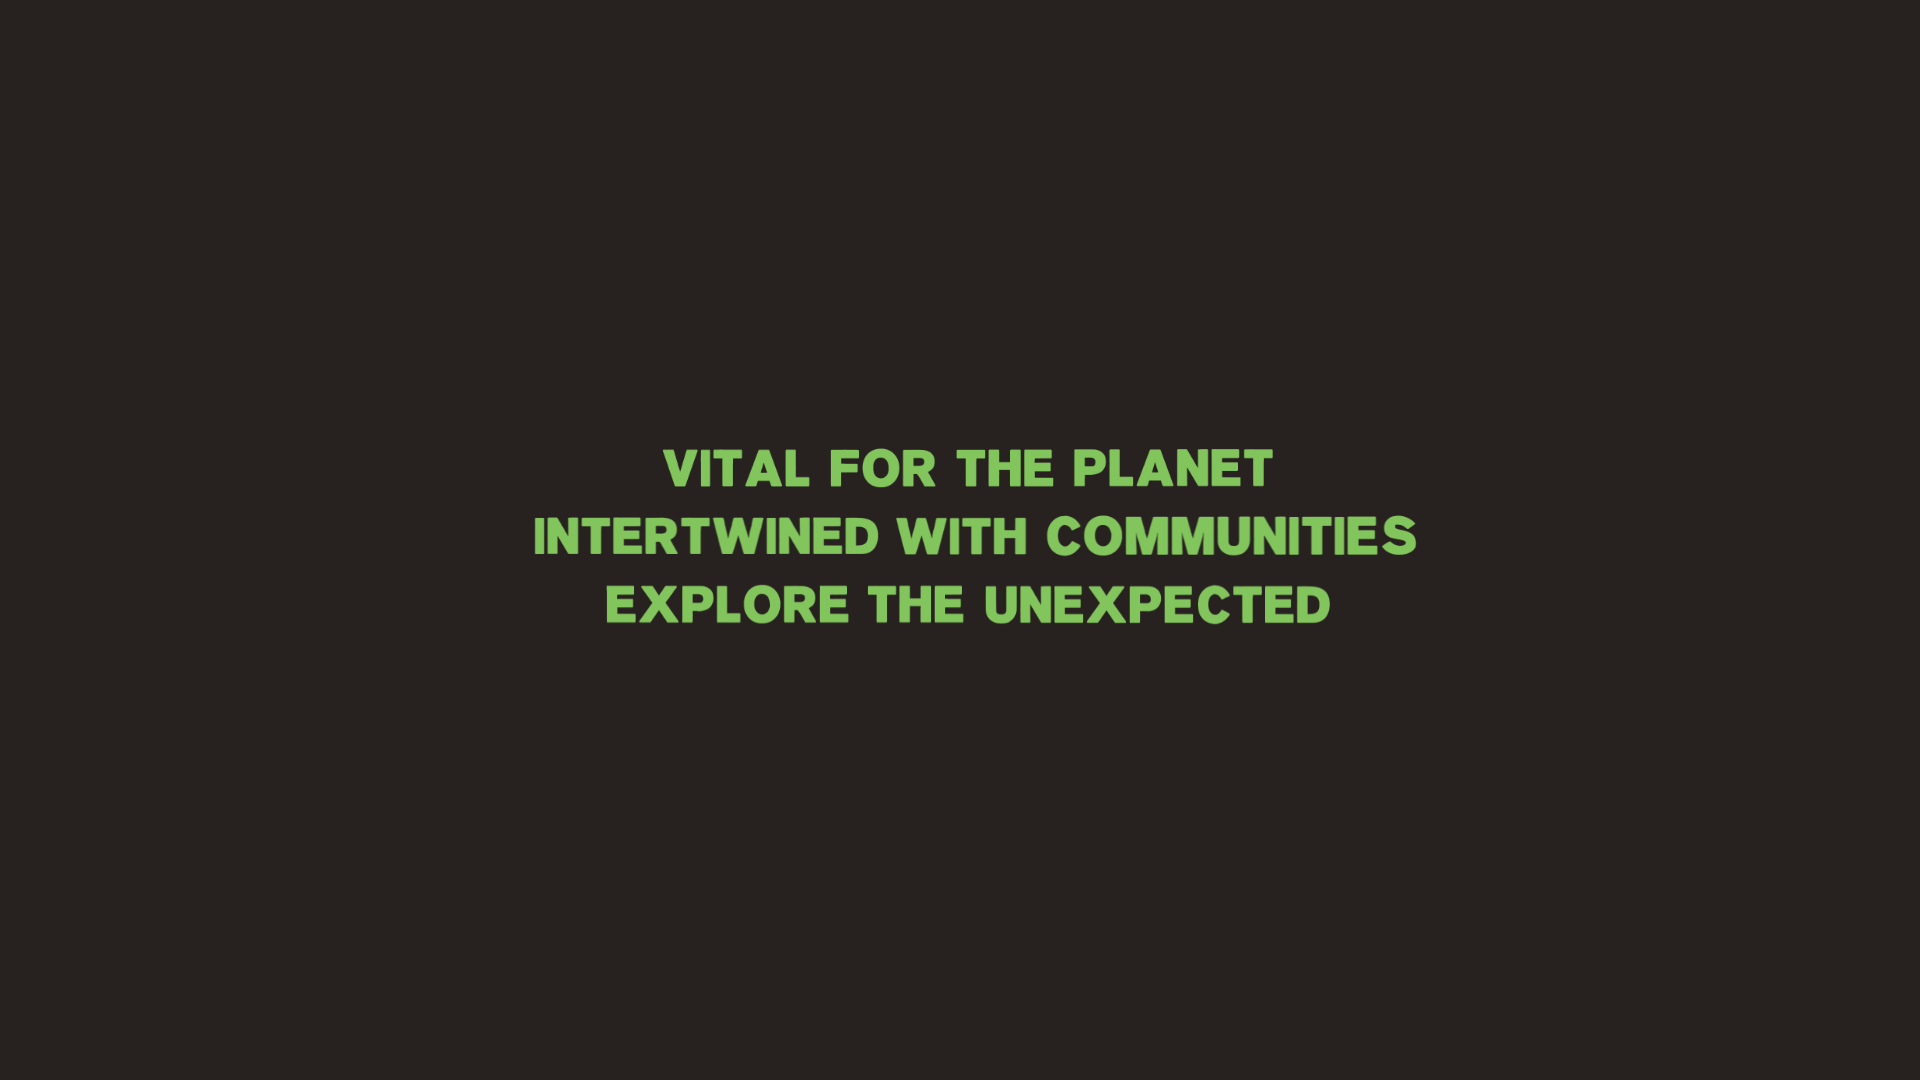 Vital for the planet, 
Intertwined with communities,
Explore the unexpected.